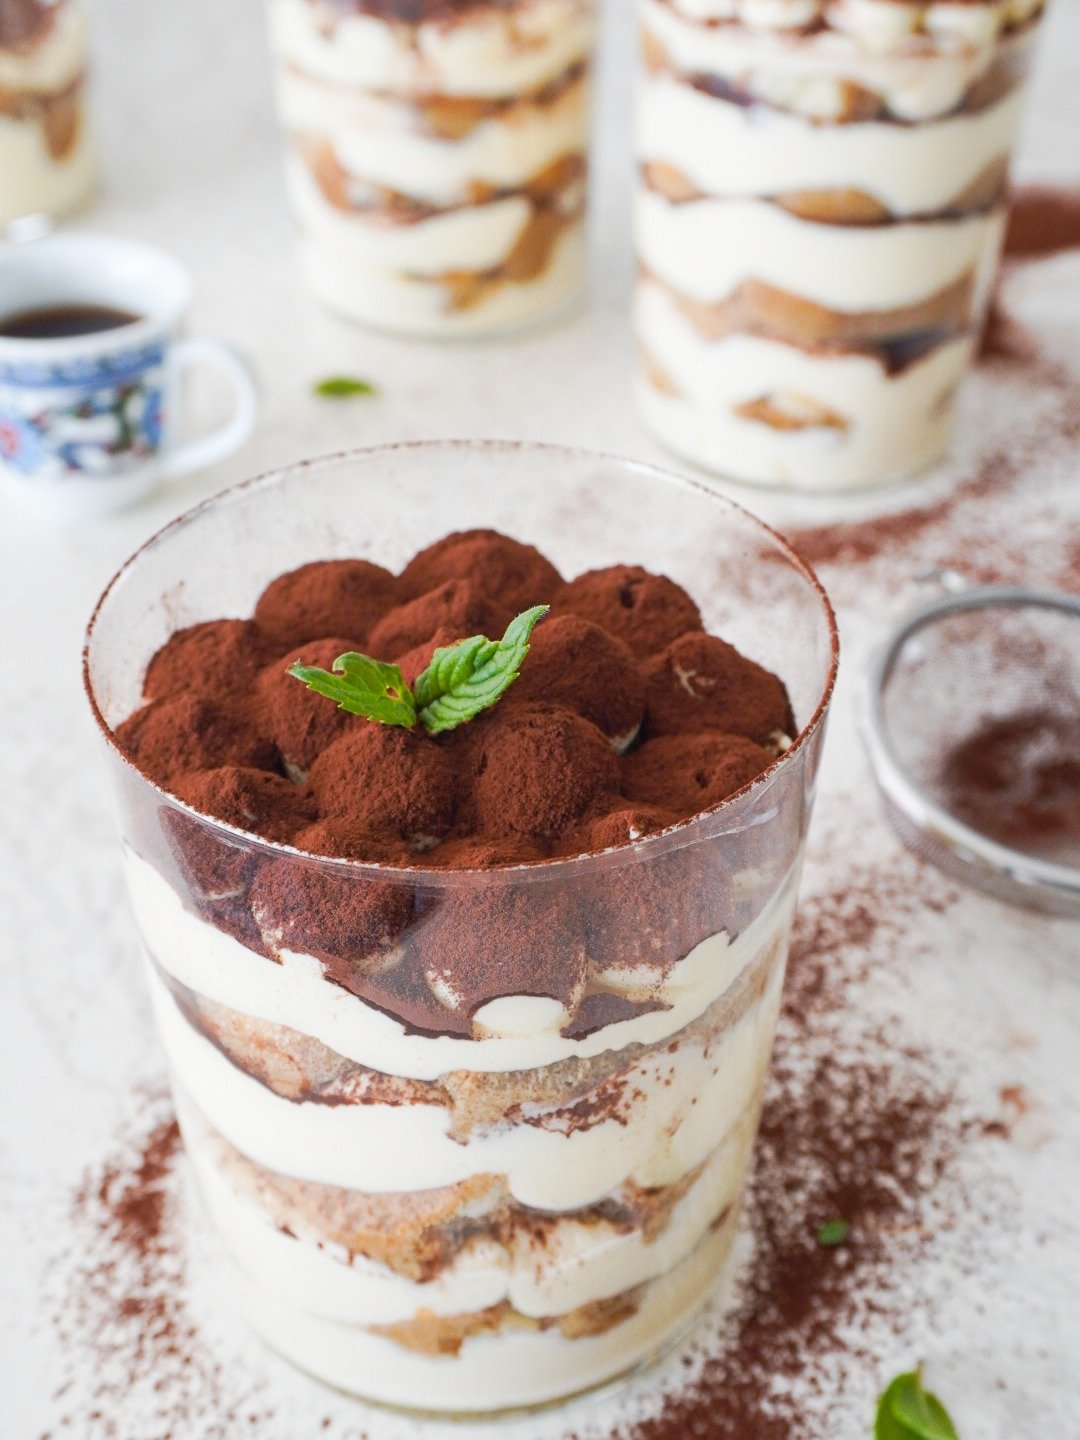 A cup of layered ladyfingers and cream topped with cacao powder